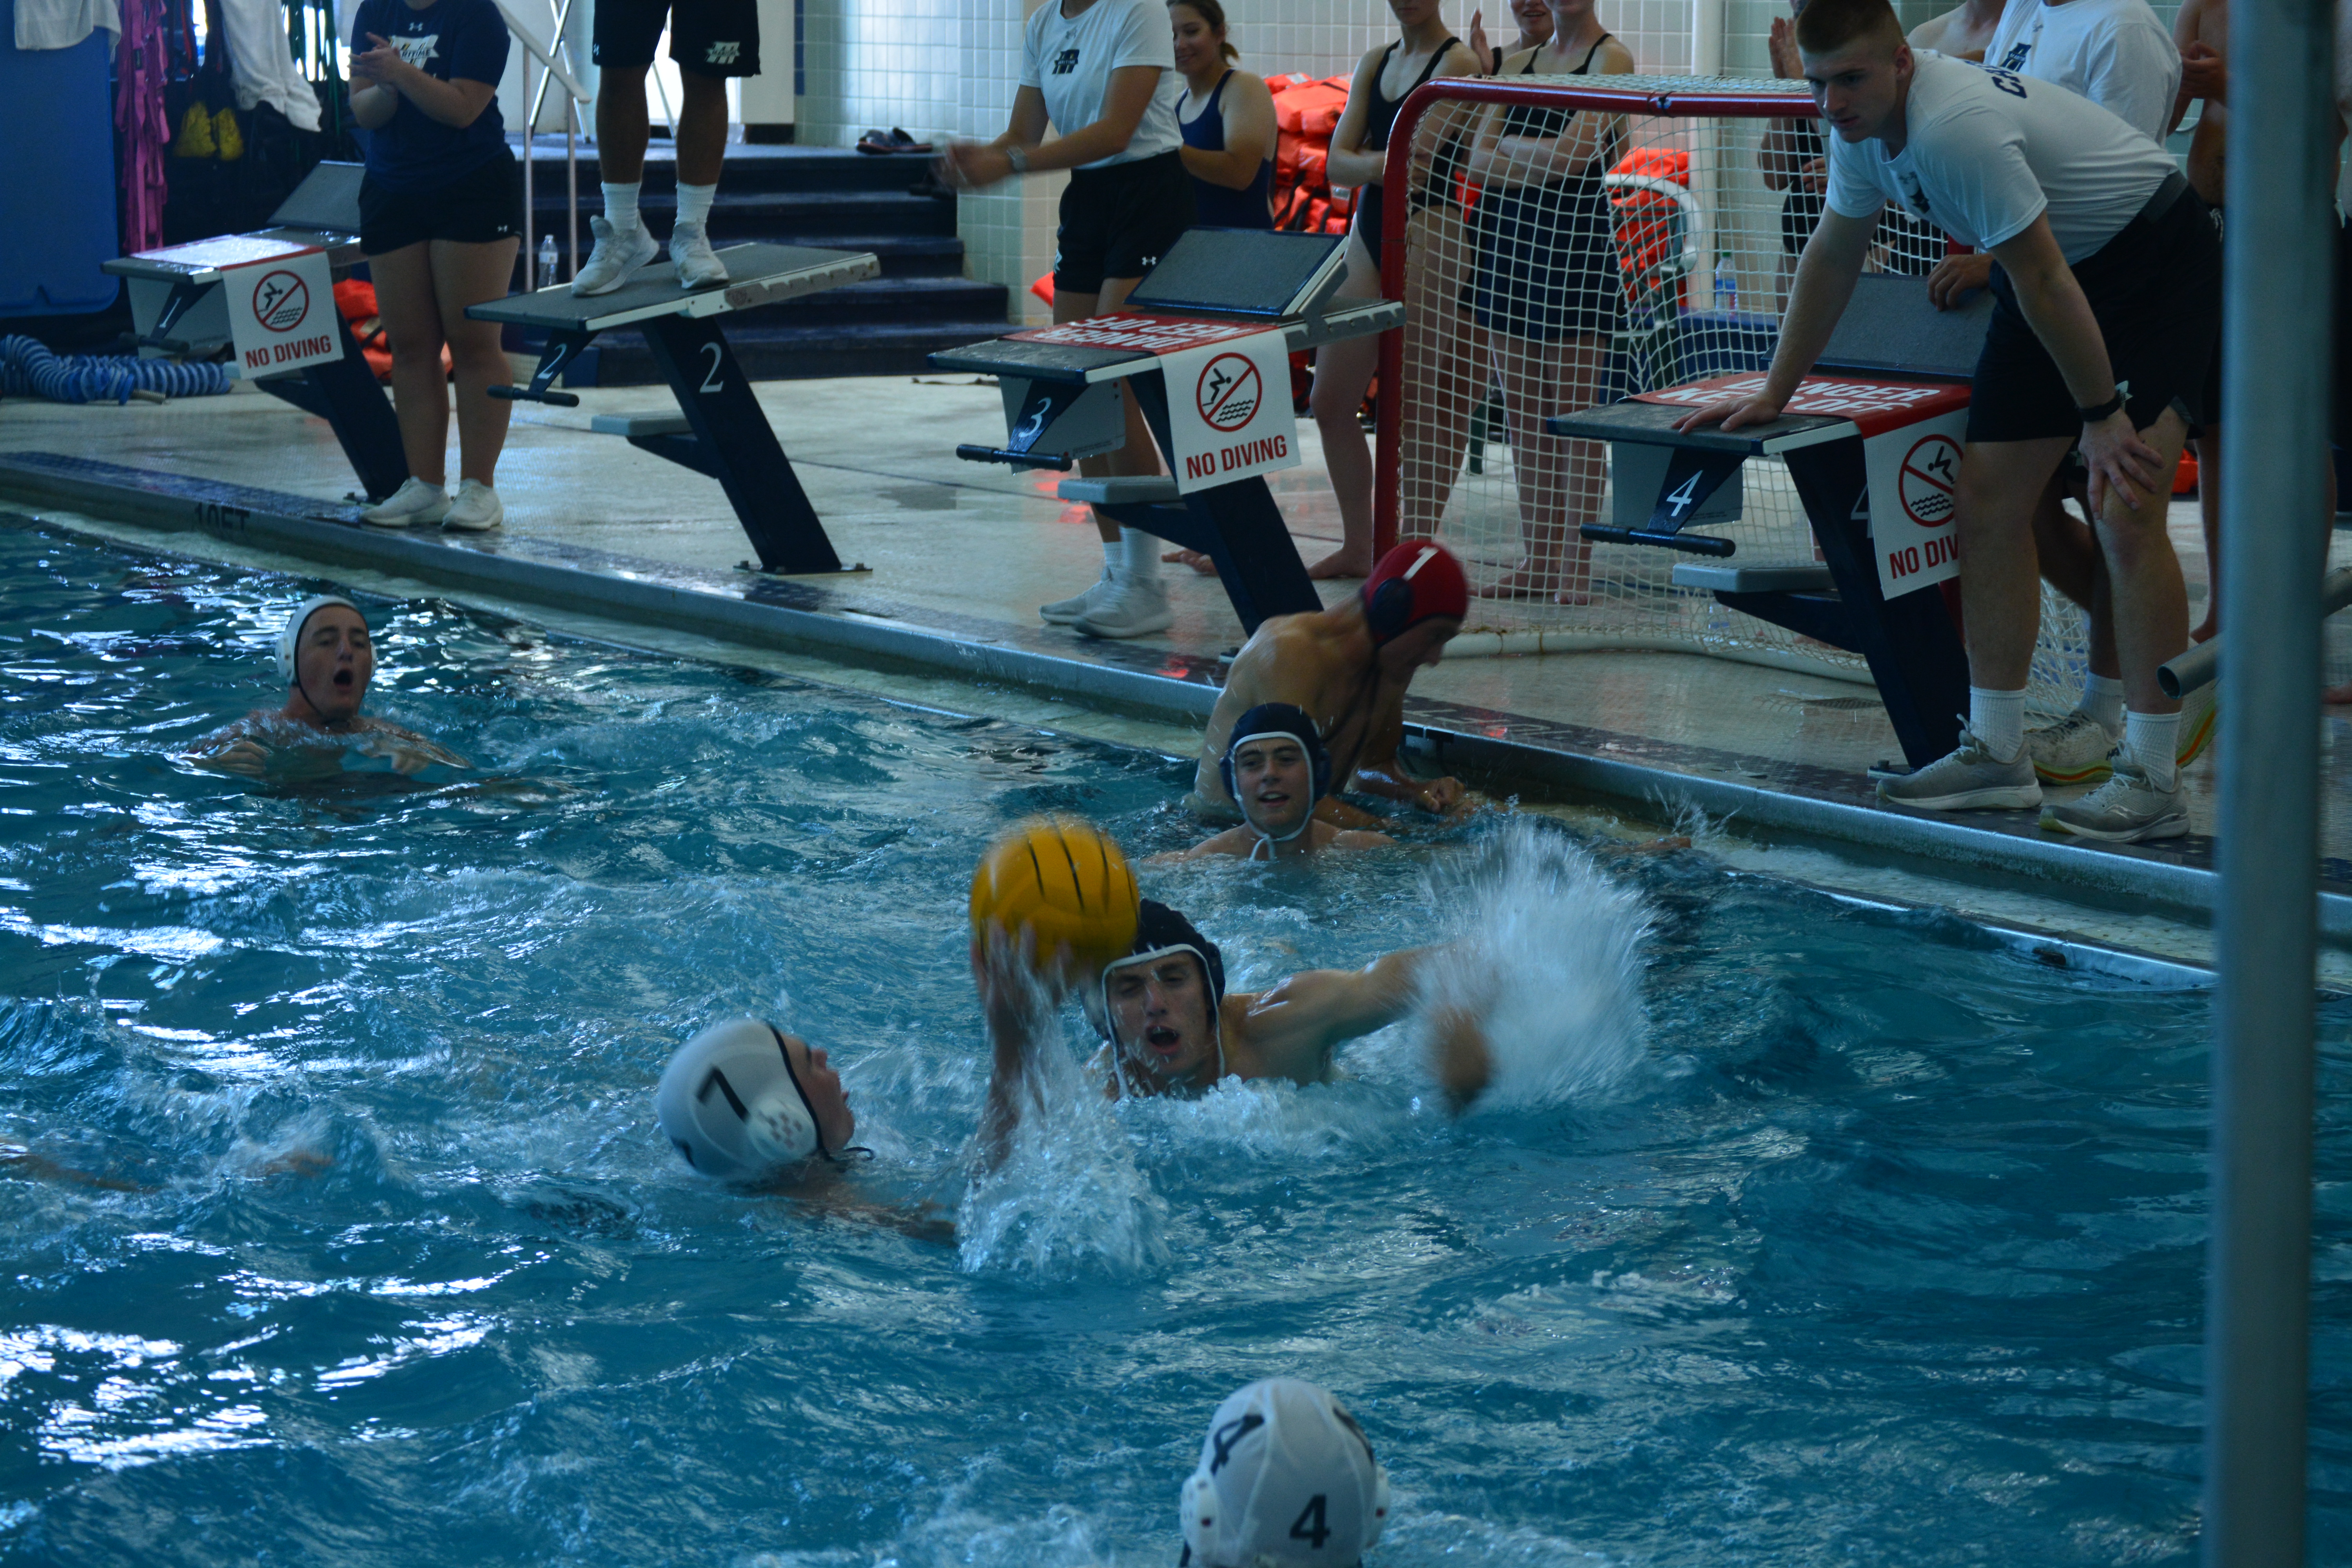 Some water polo action!